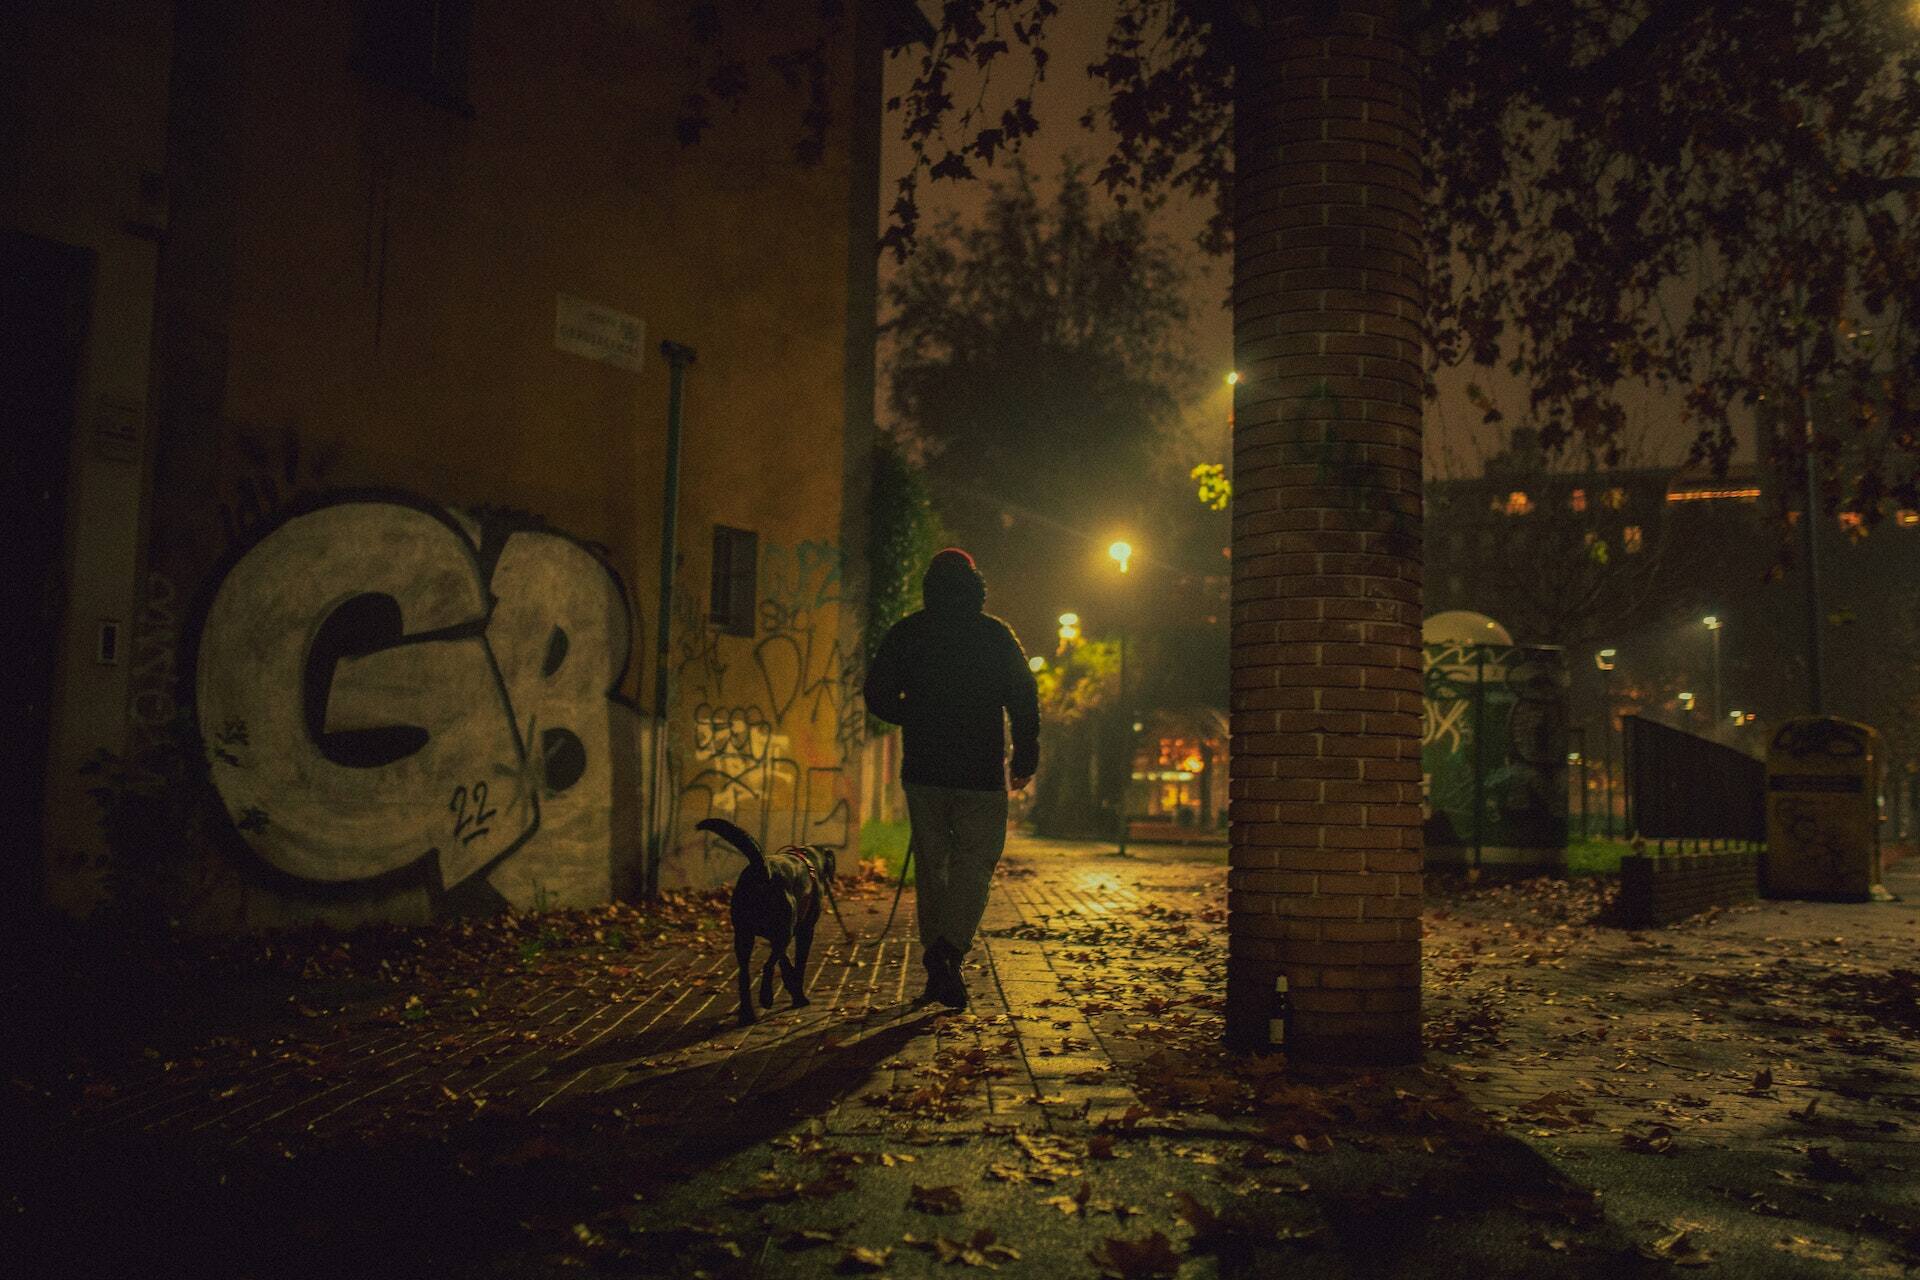 A man walking his dog through a city in the late evening